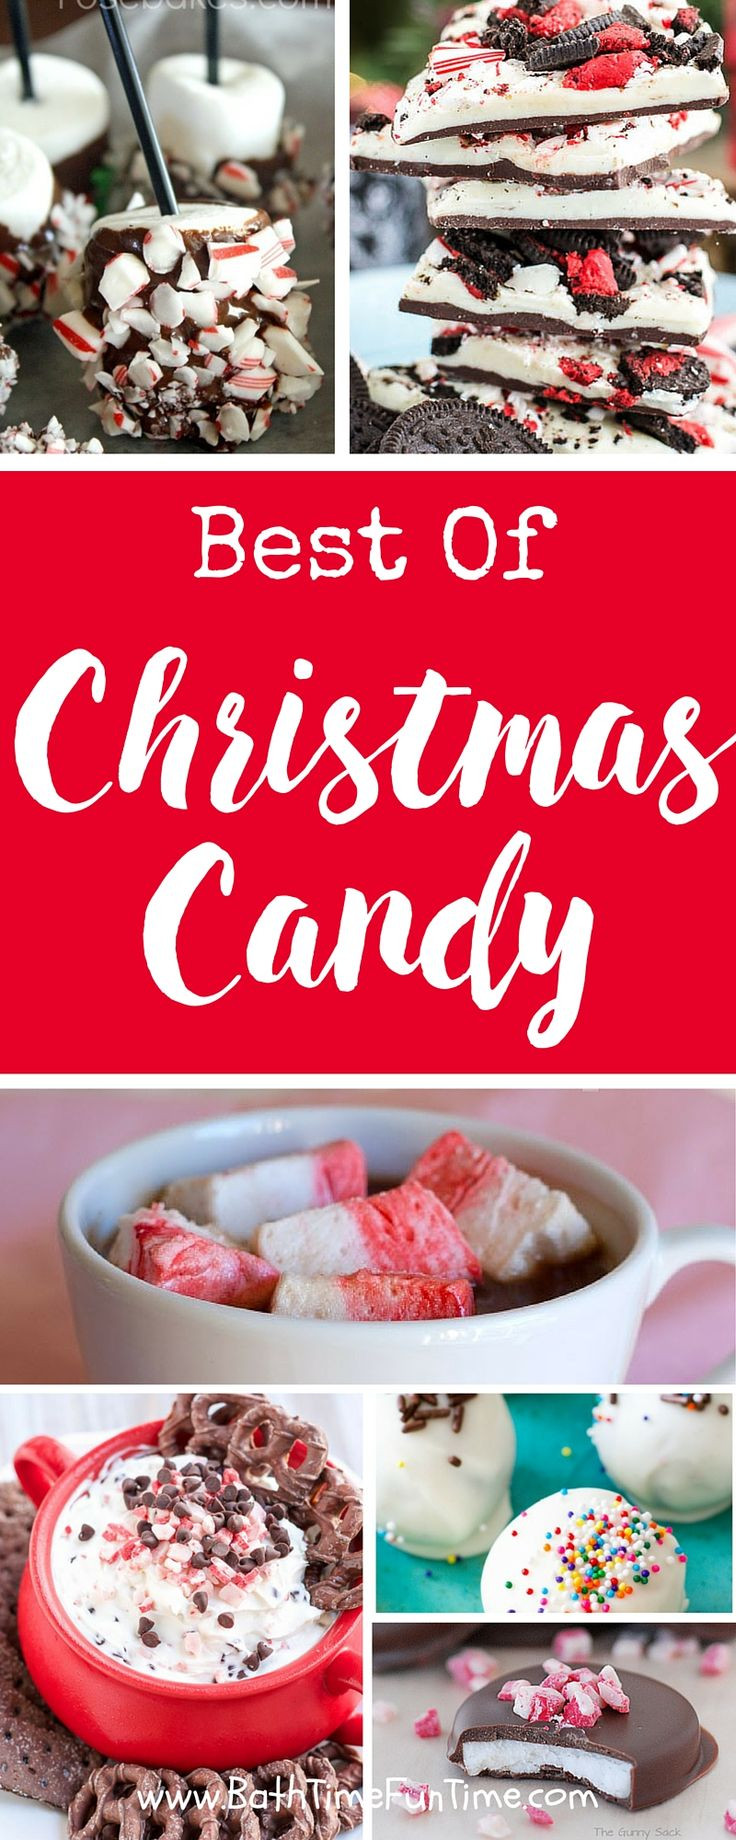 Easy Christmas Candy Recipes For Gifts
 1000 images about Best of BathTimeFunTime on